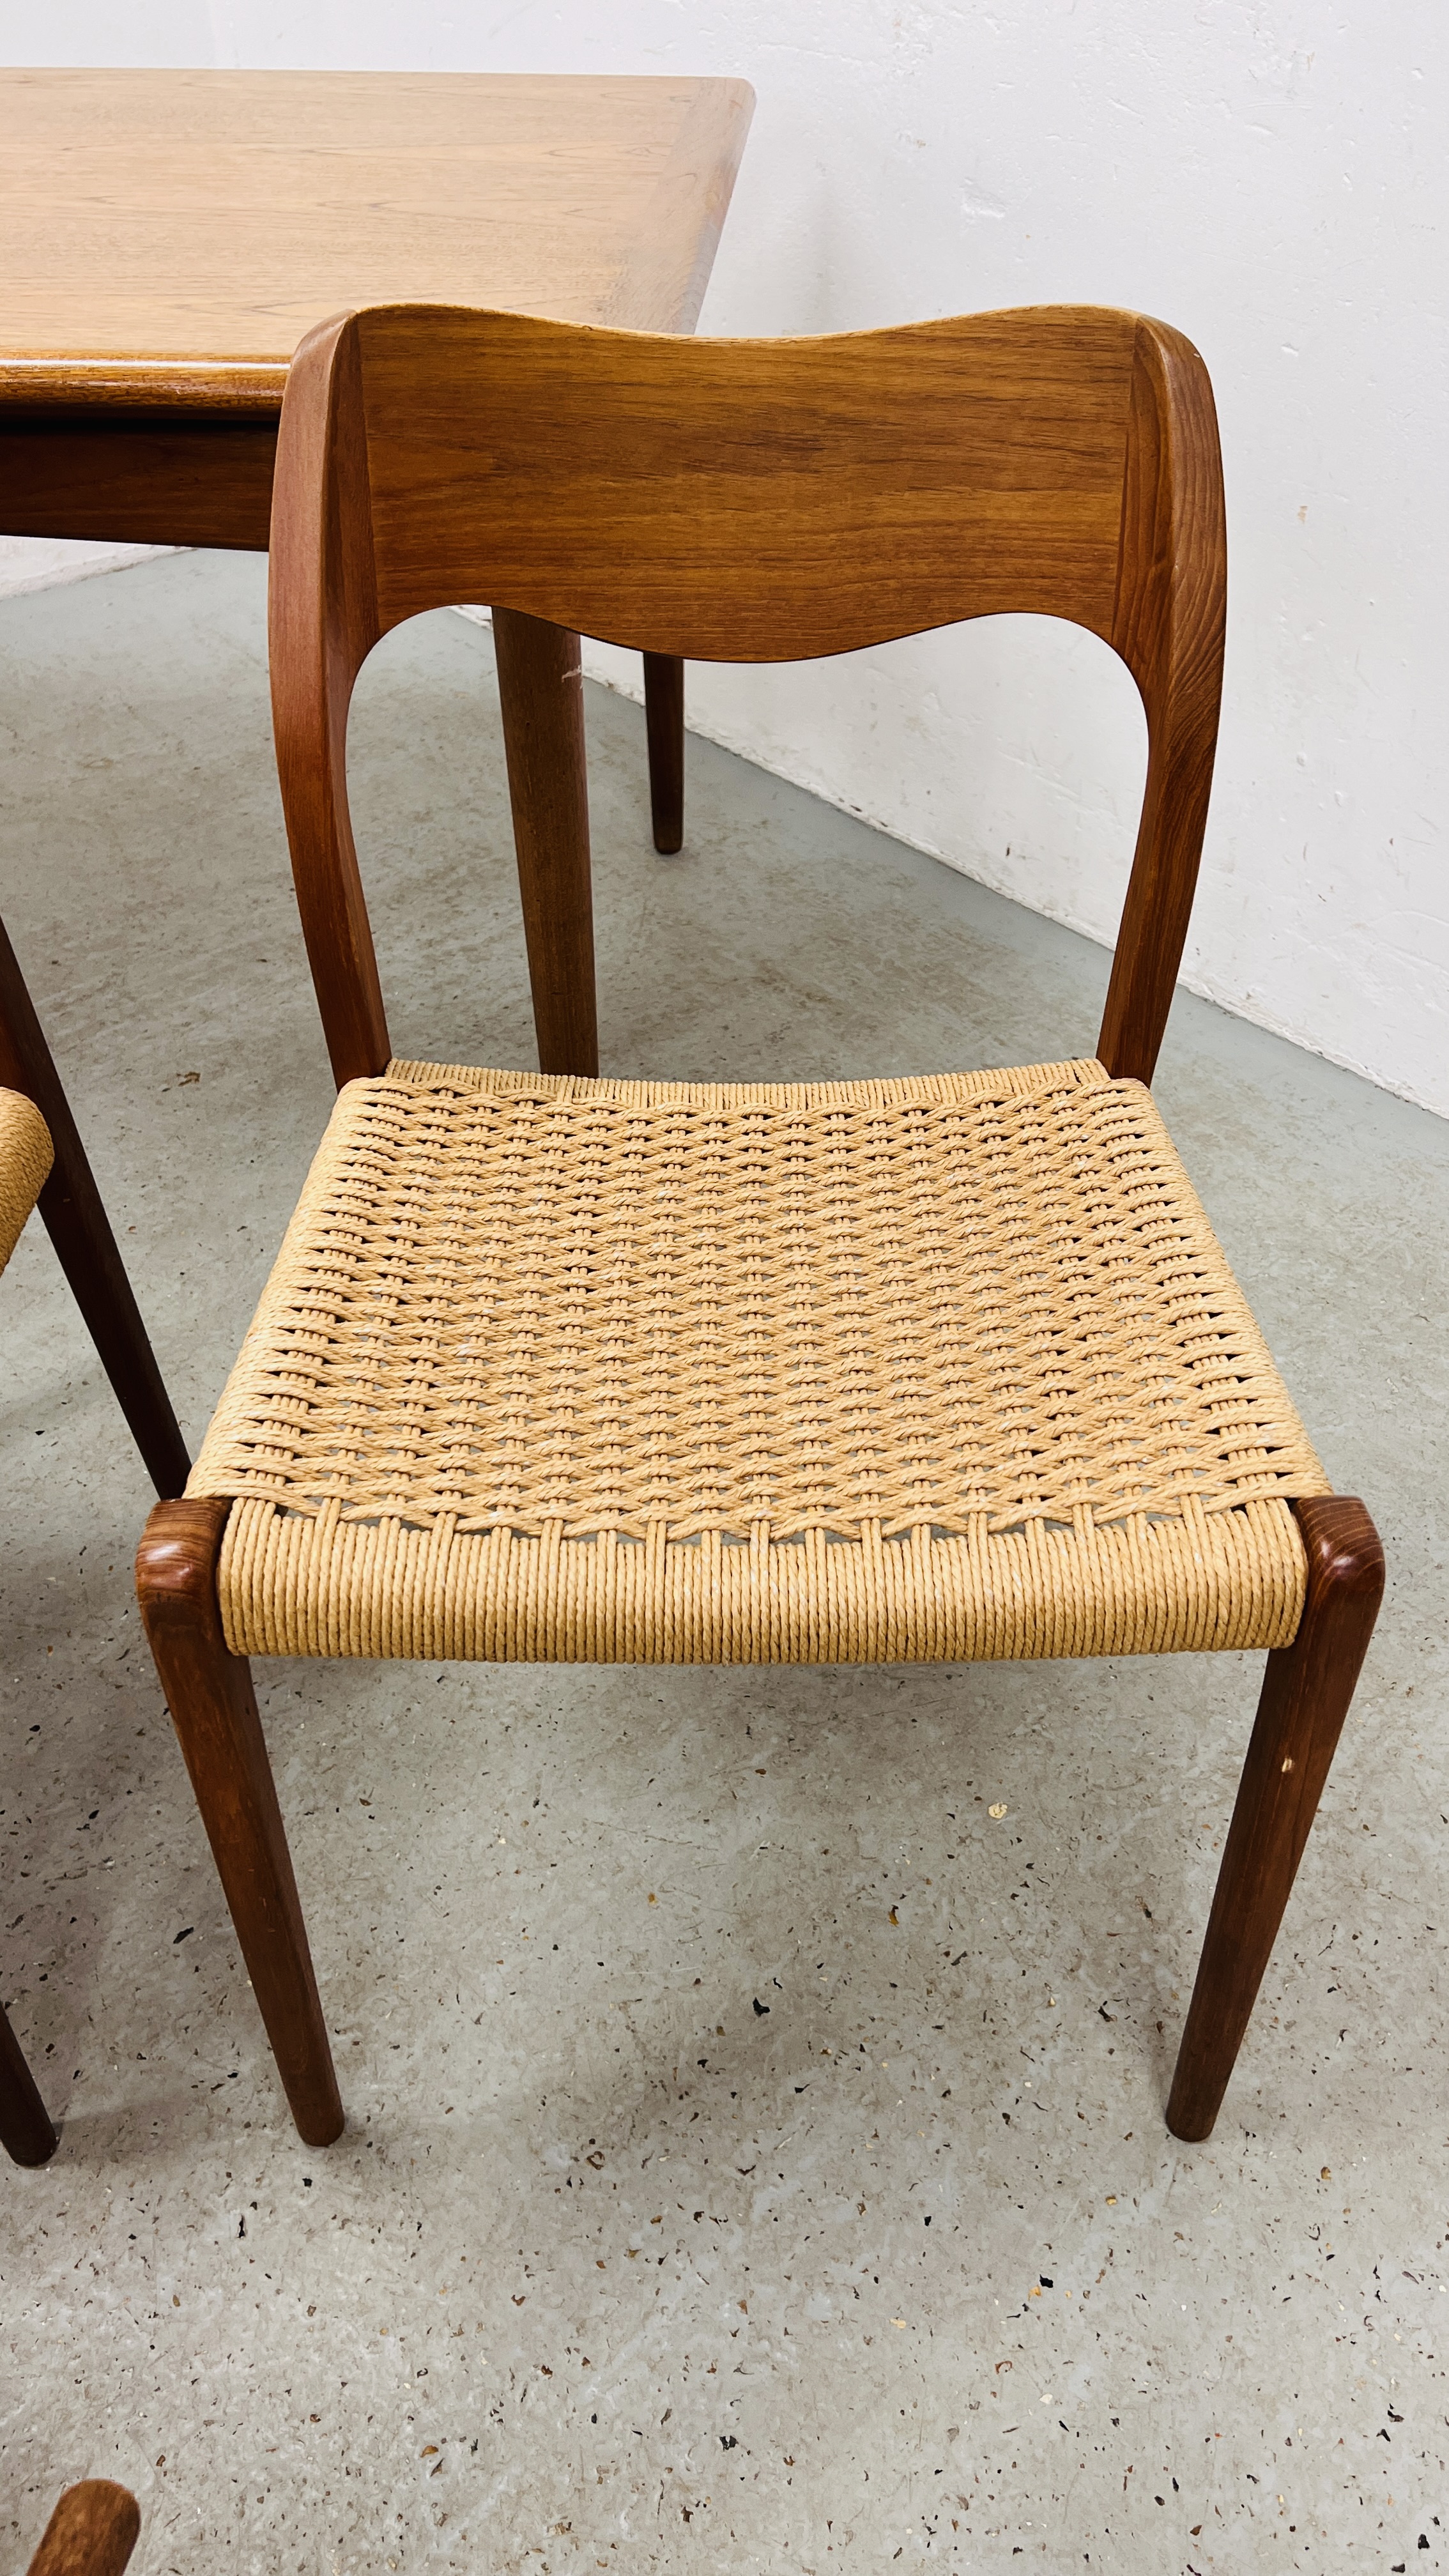 SET OF EIGHT J MOLLER DANISH TEAK DINING CHAIRS WITH WOVEN SISAL SEATS ALONG WITH A DRAWER LEAF - Image 14 of 48